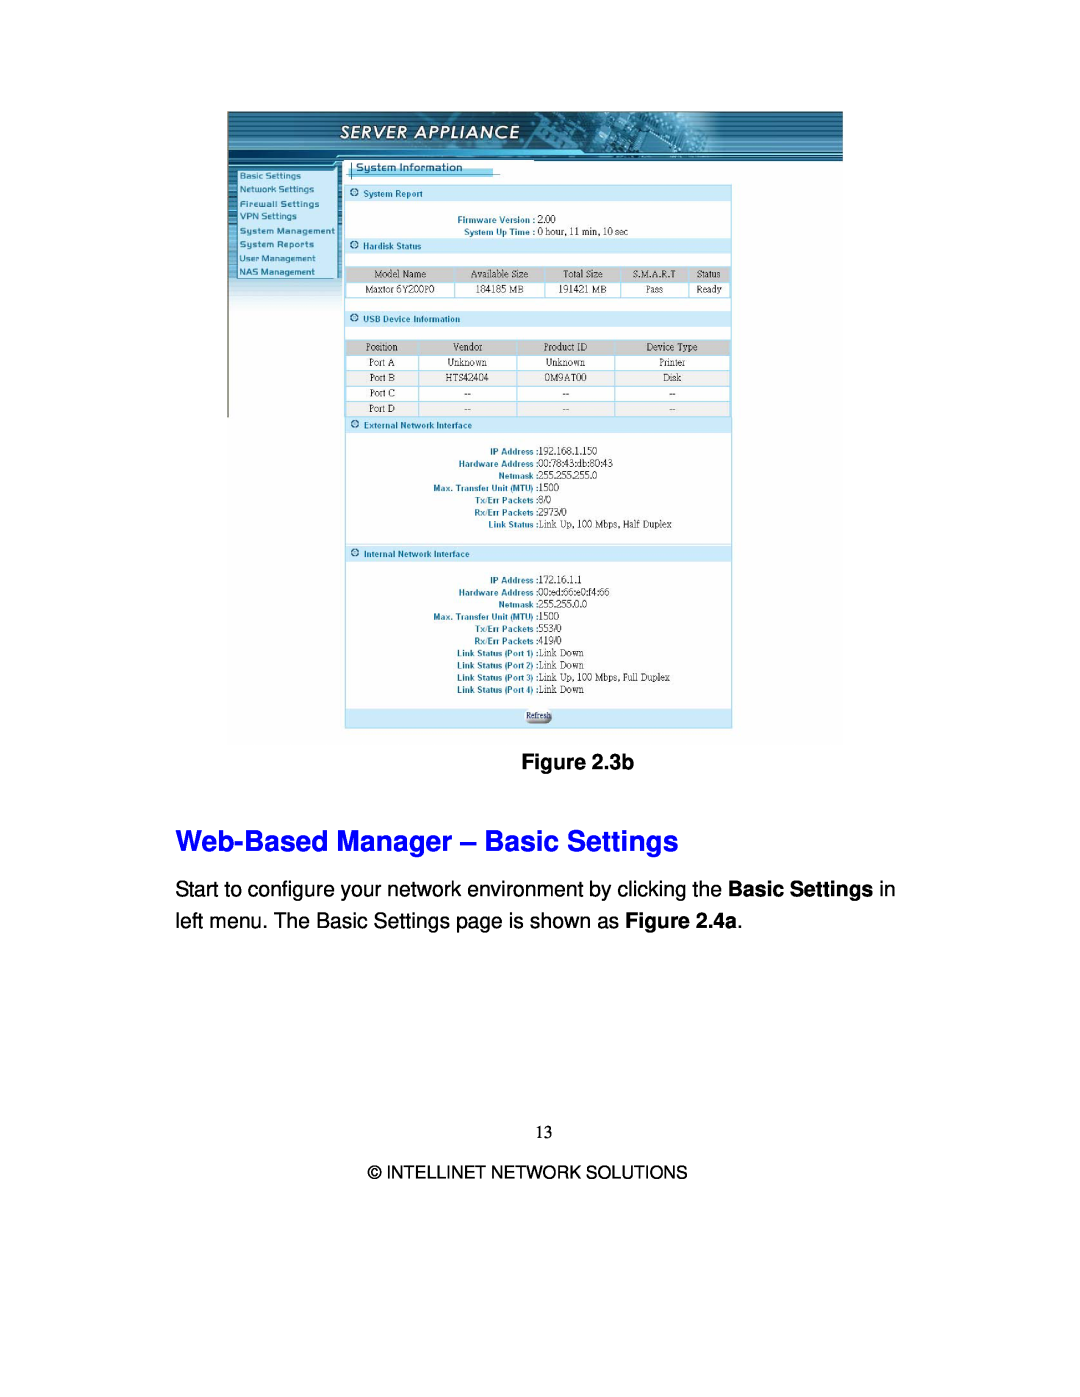 Intellinet Network Solutions 501705 manual Web-Based Manager - Basic Settings, 3b, Intellinet Network Solutions 